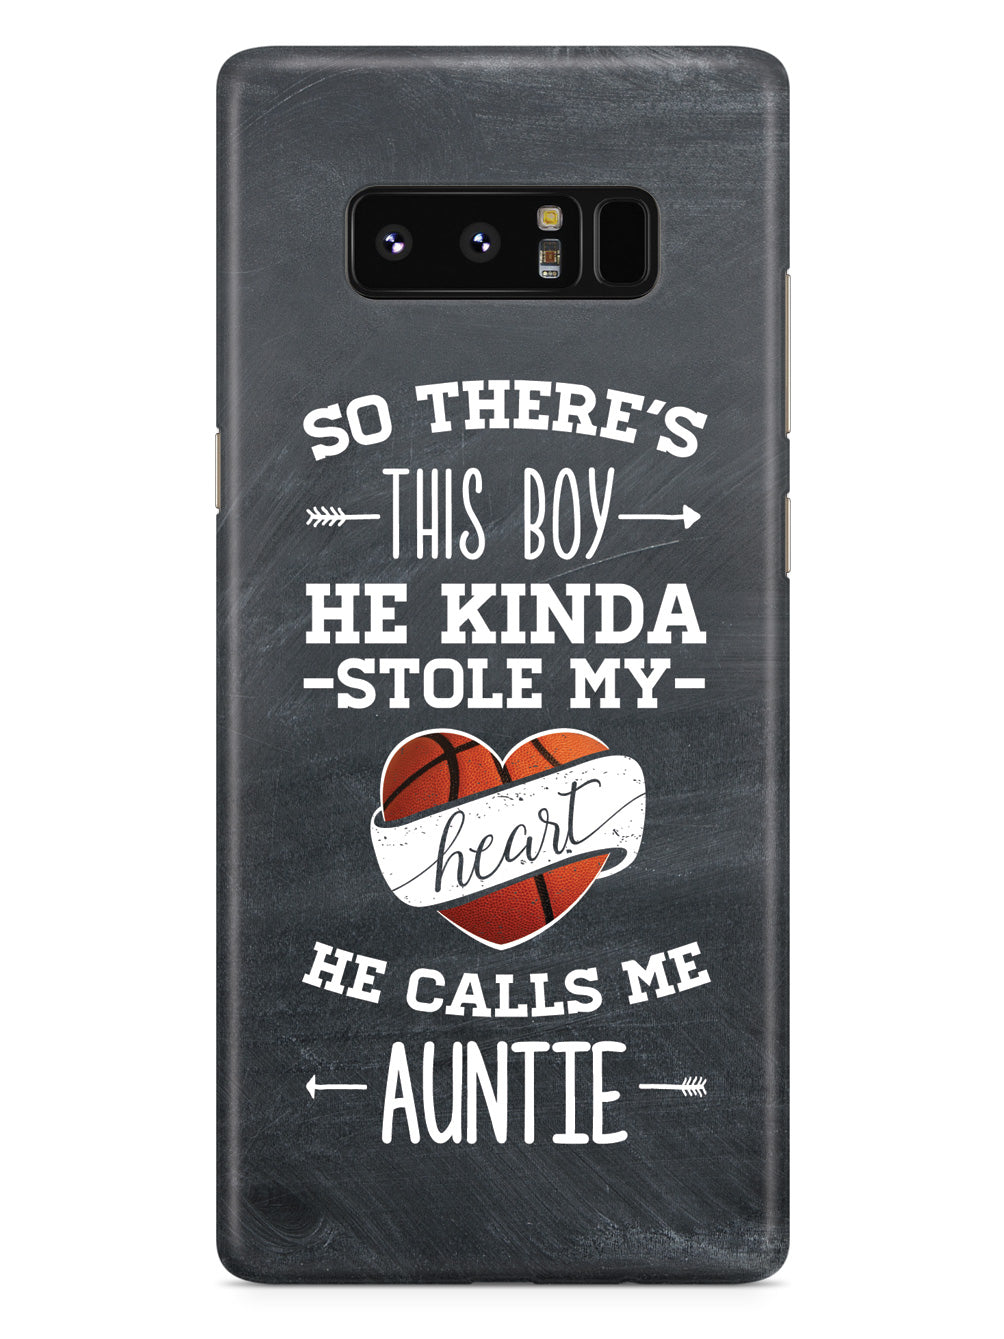 So there's this Boy - Basketball Player - Auntie Case